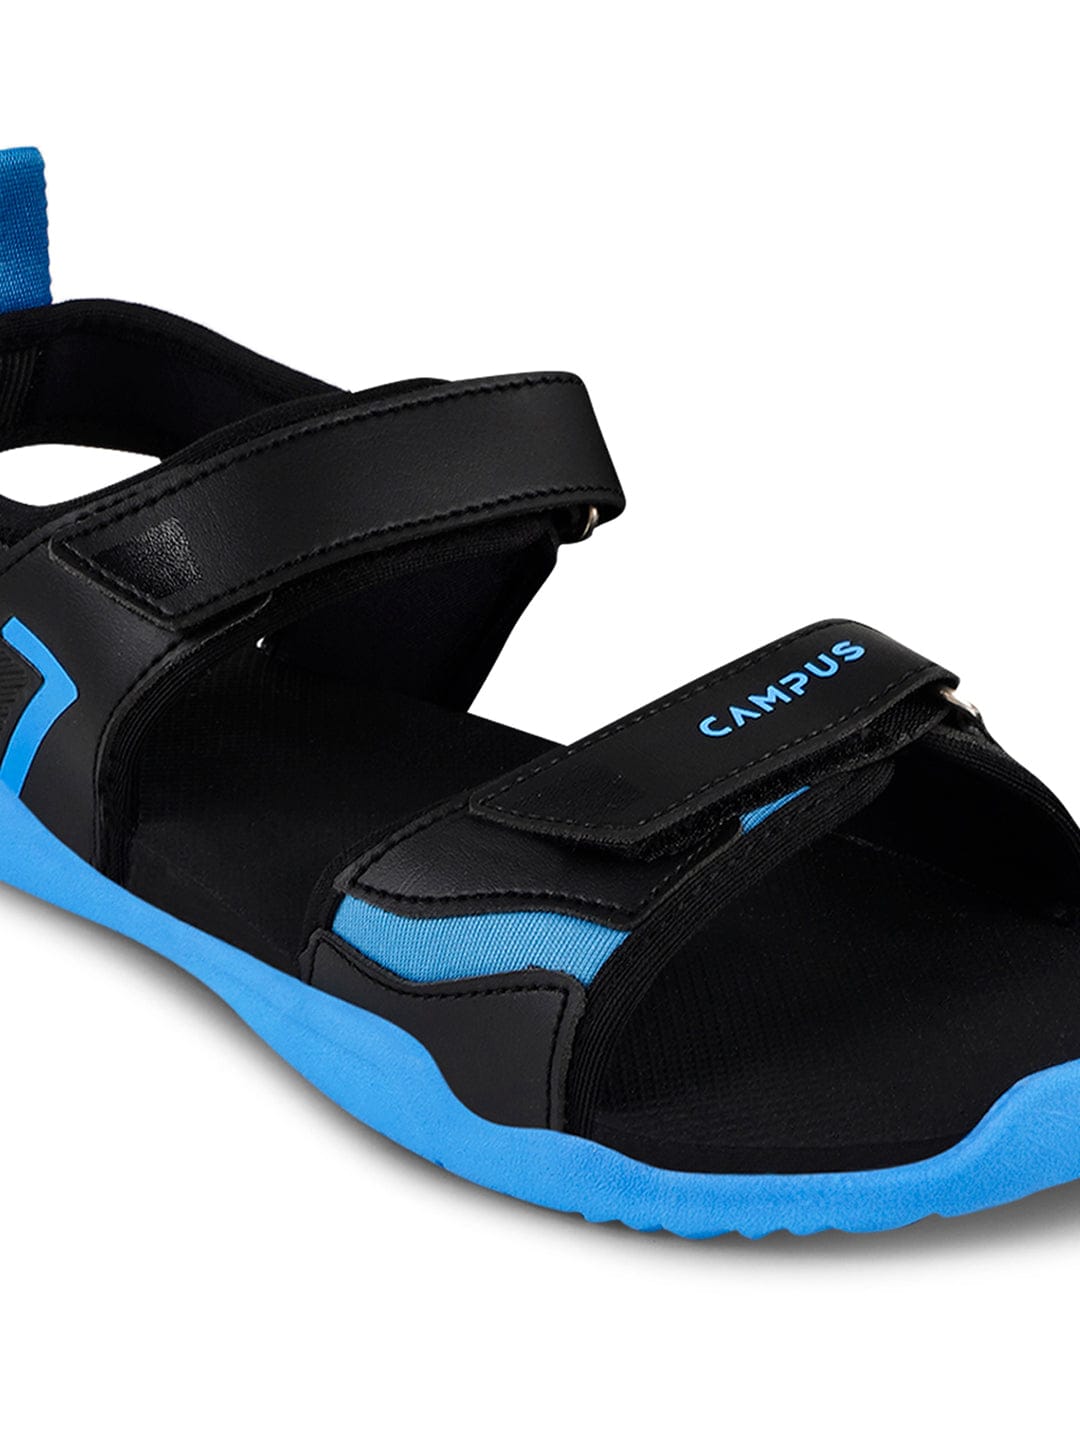 Buy Sandals For Men: 2Gc-3-2Gc-03Navy-Bright-Org799 | Campus Shoes